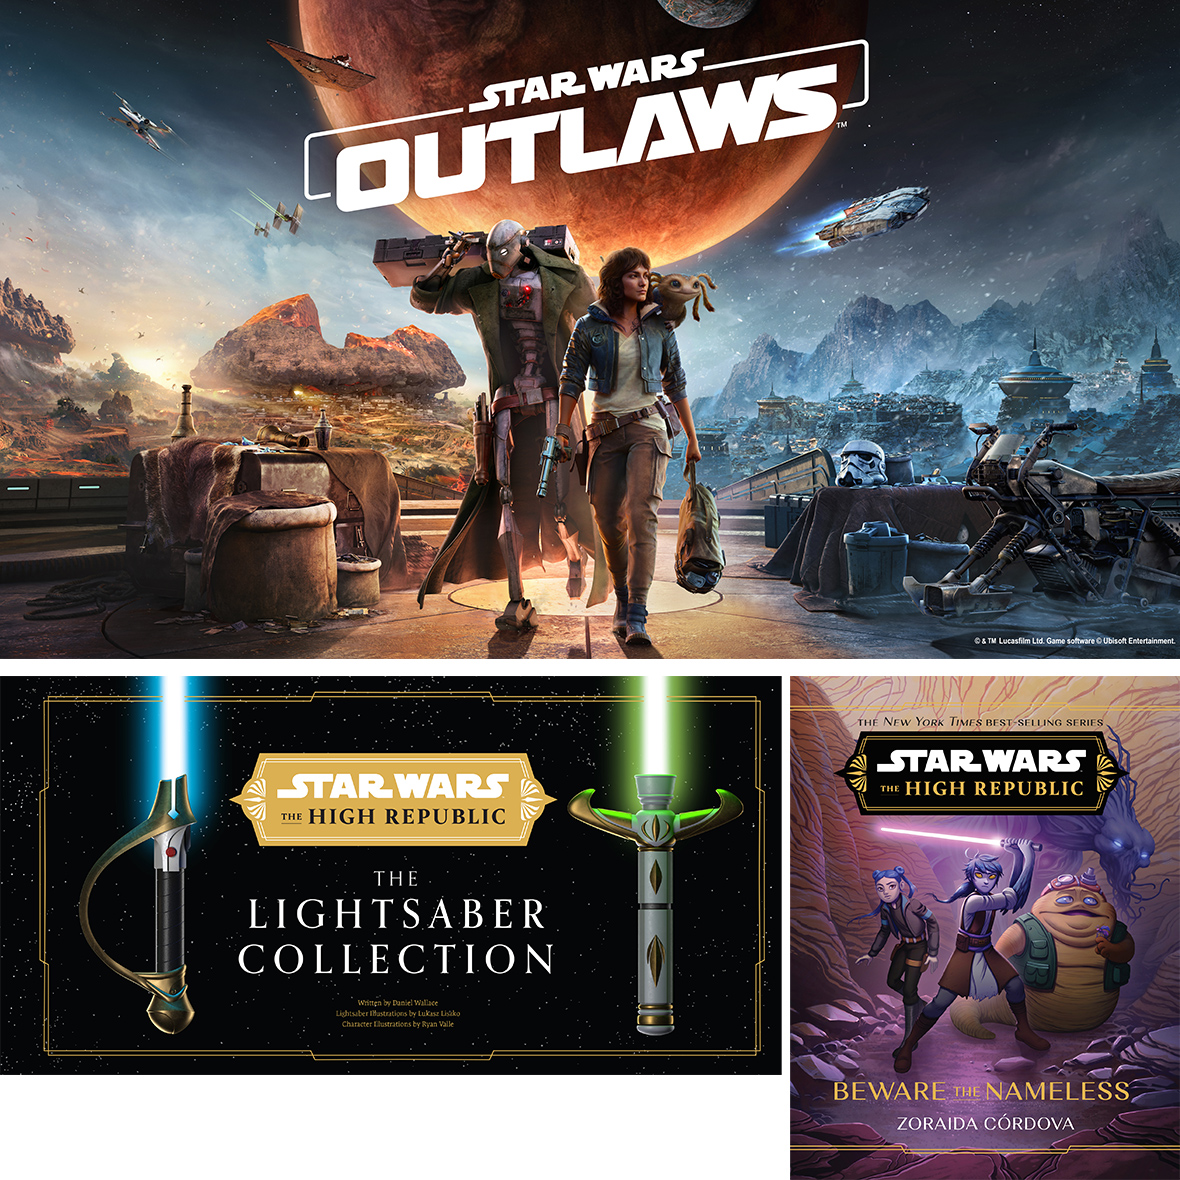 Top – Star Wars Outlaws video game rendering. Bottom left – Star Wars: The High Republic: The Lightsaber Collection from Insight Editions cover art. Bottom right – Star Wars: The High Republic: Beware the Nameless cover art.